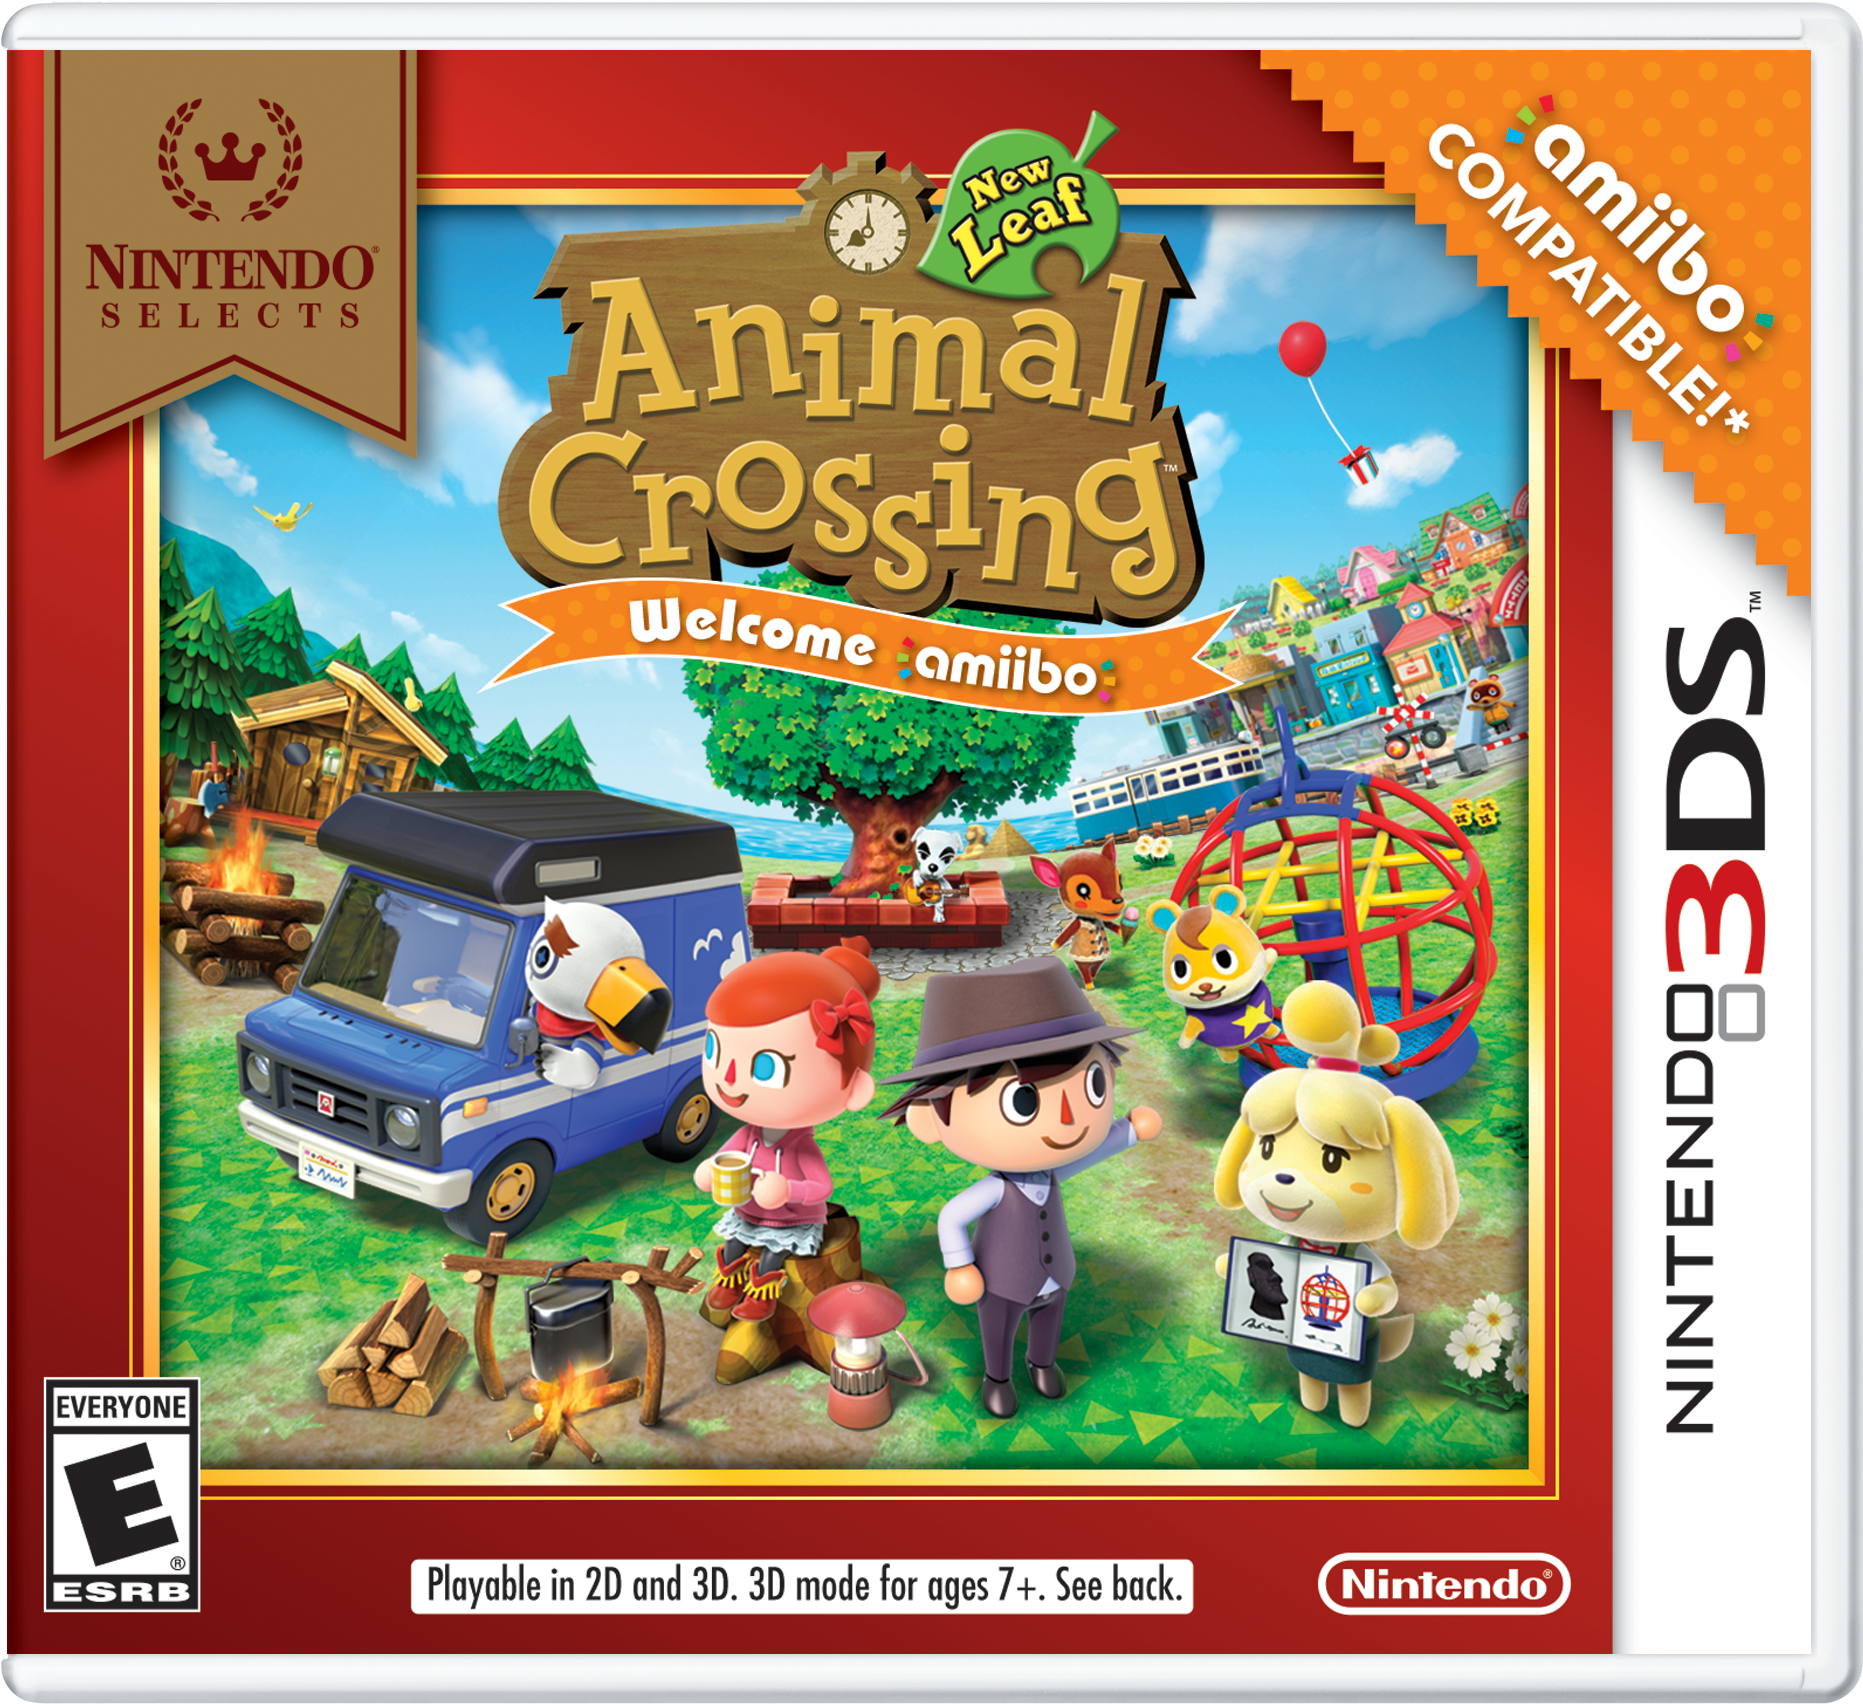 3ds_acnl-welcomeamiibo_pkg01